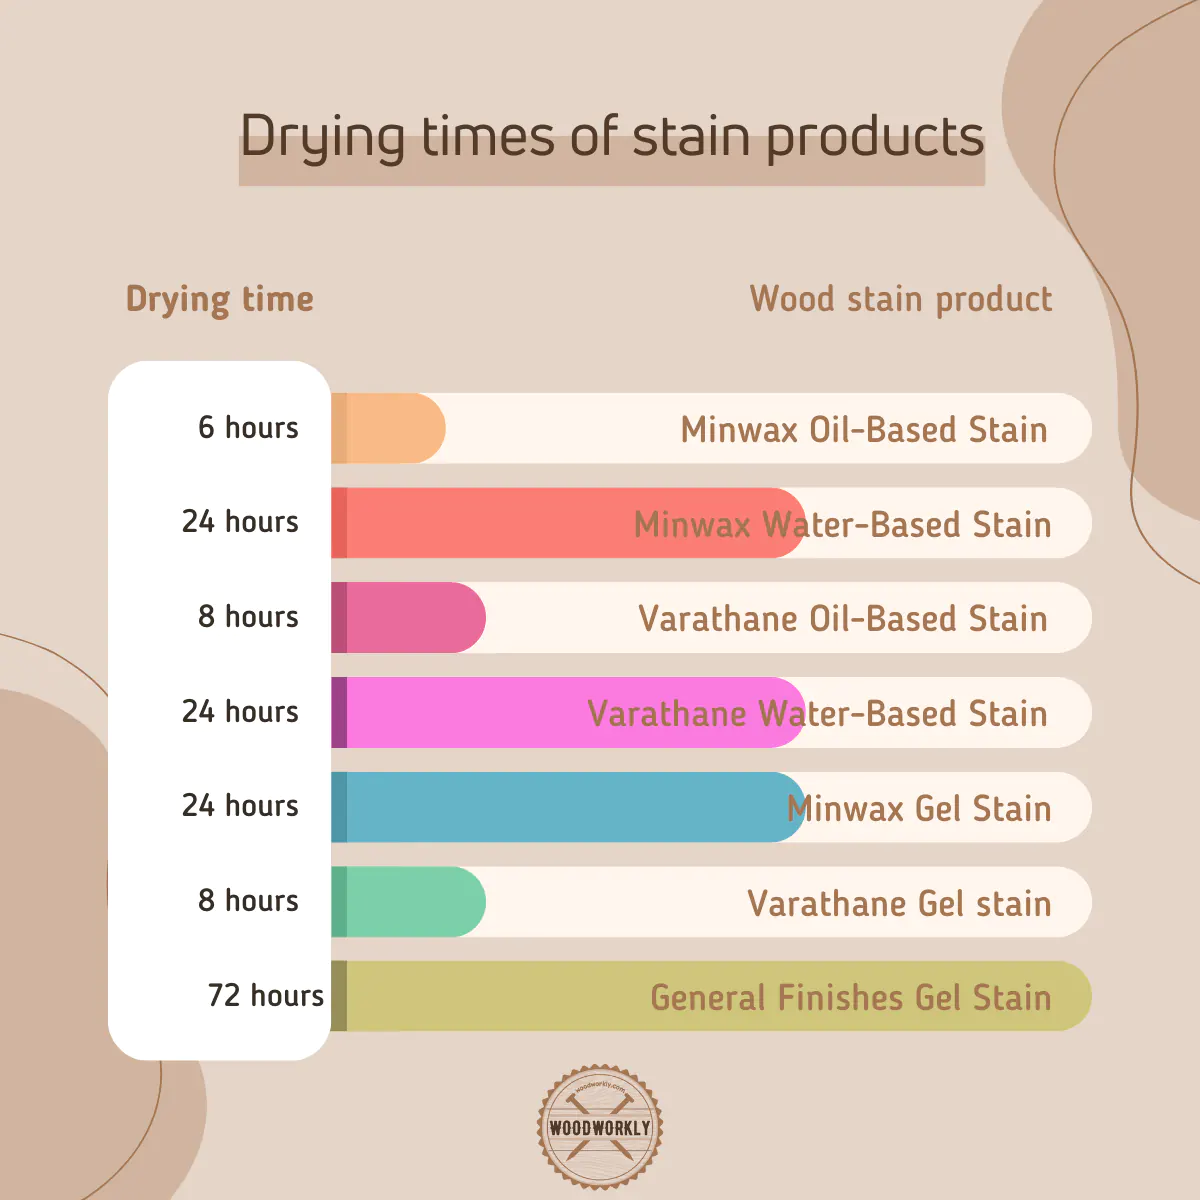 Drying times of stain products